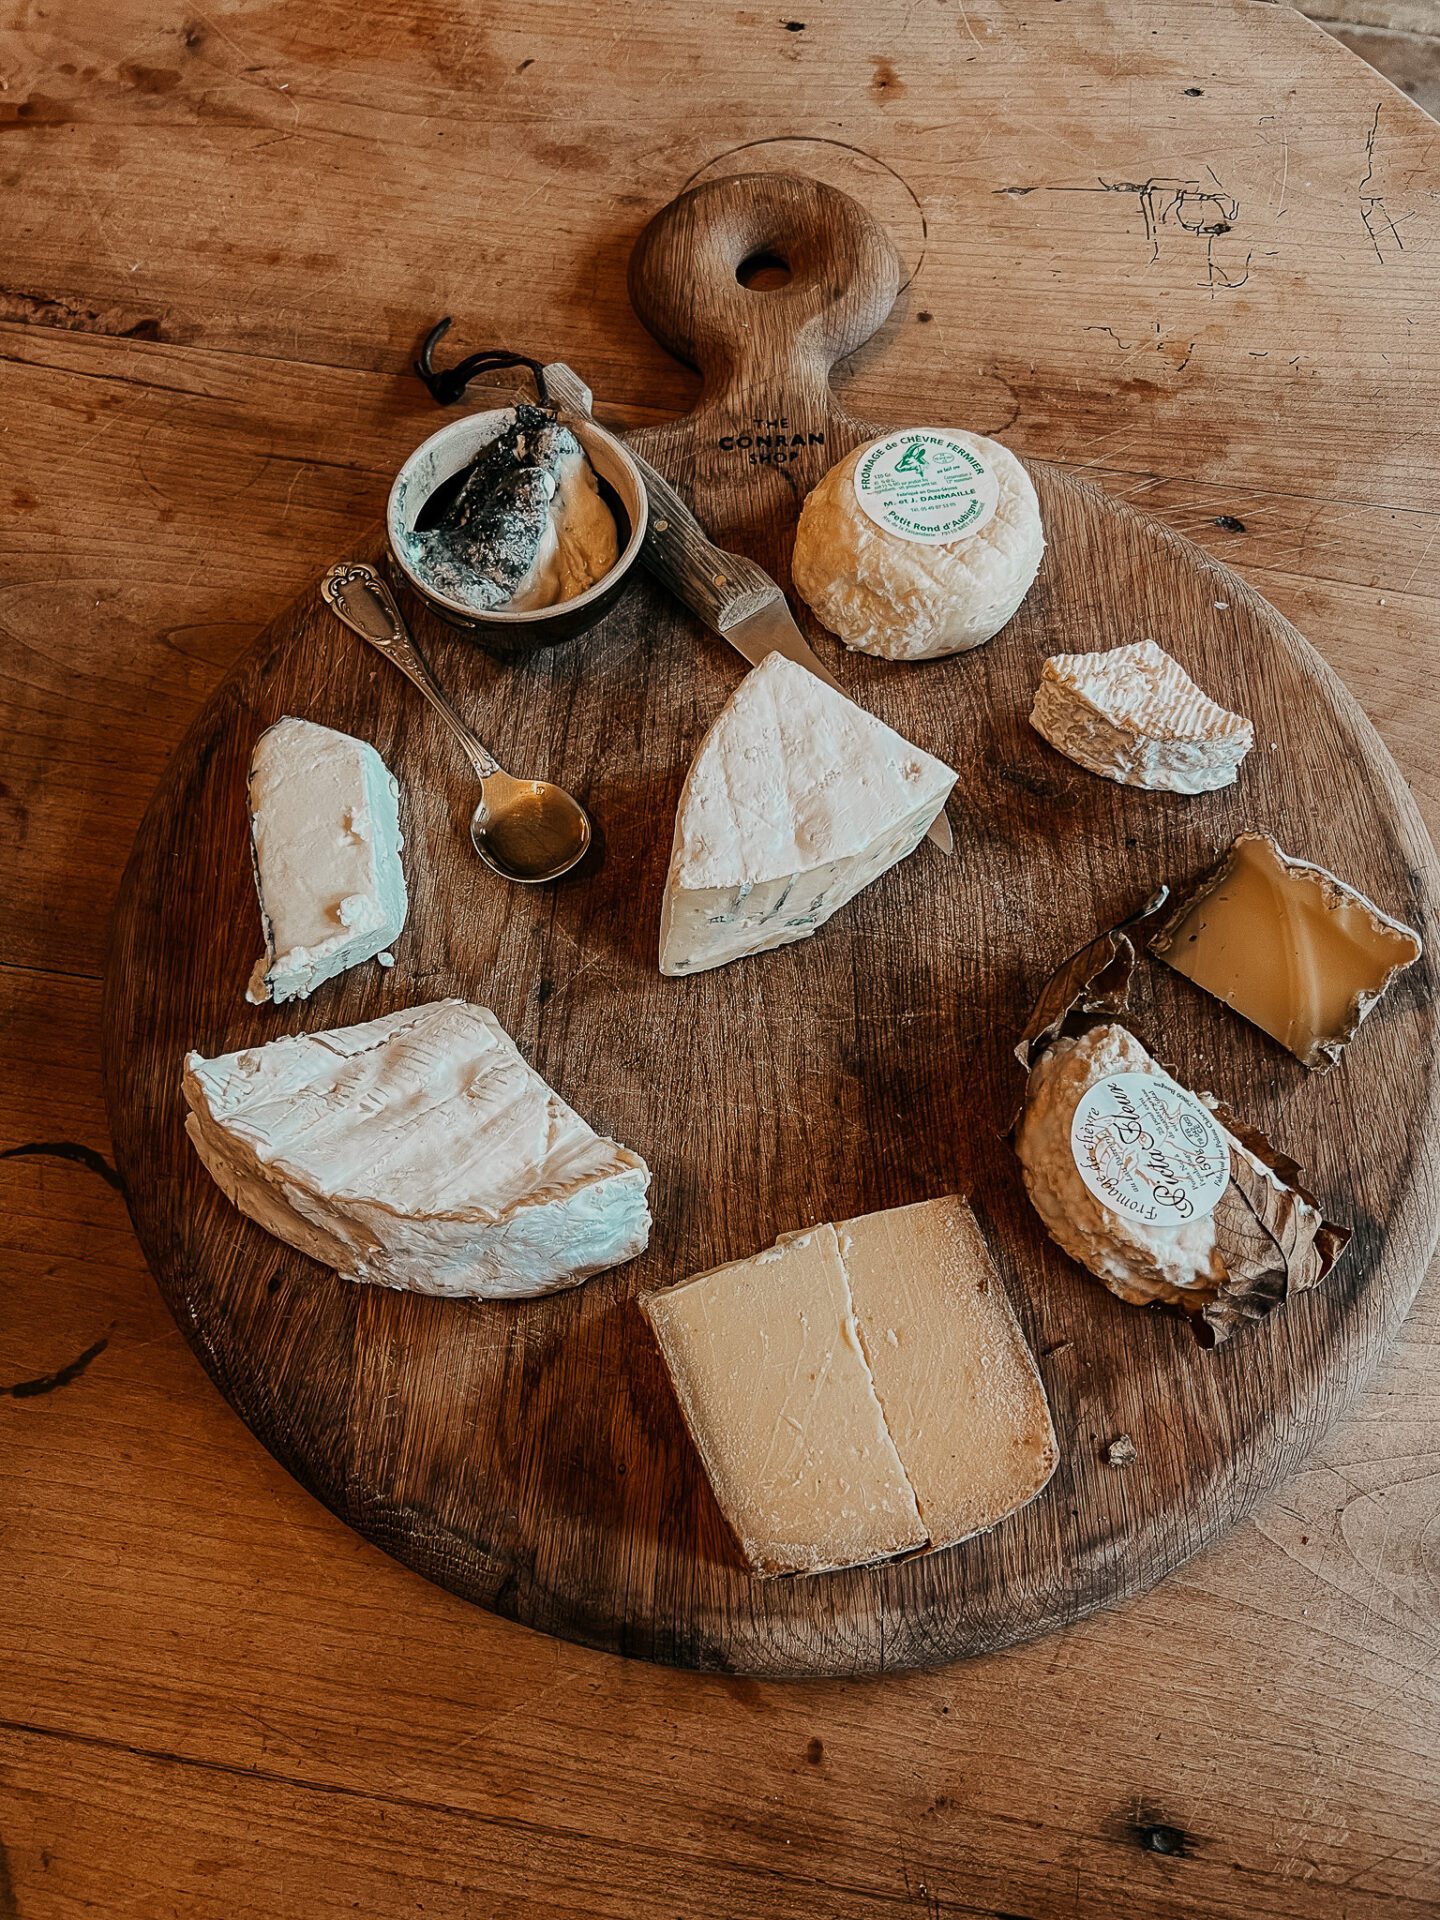 French cheese plate photo by Emily Fouilleroux